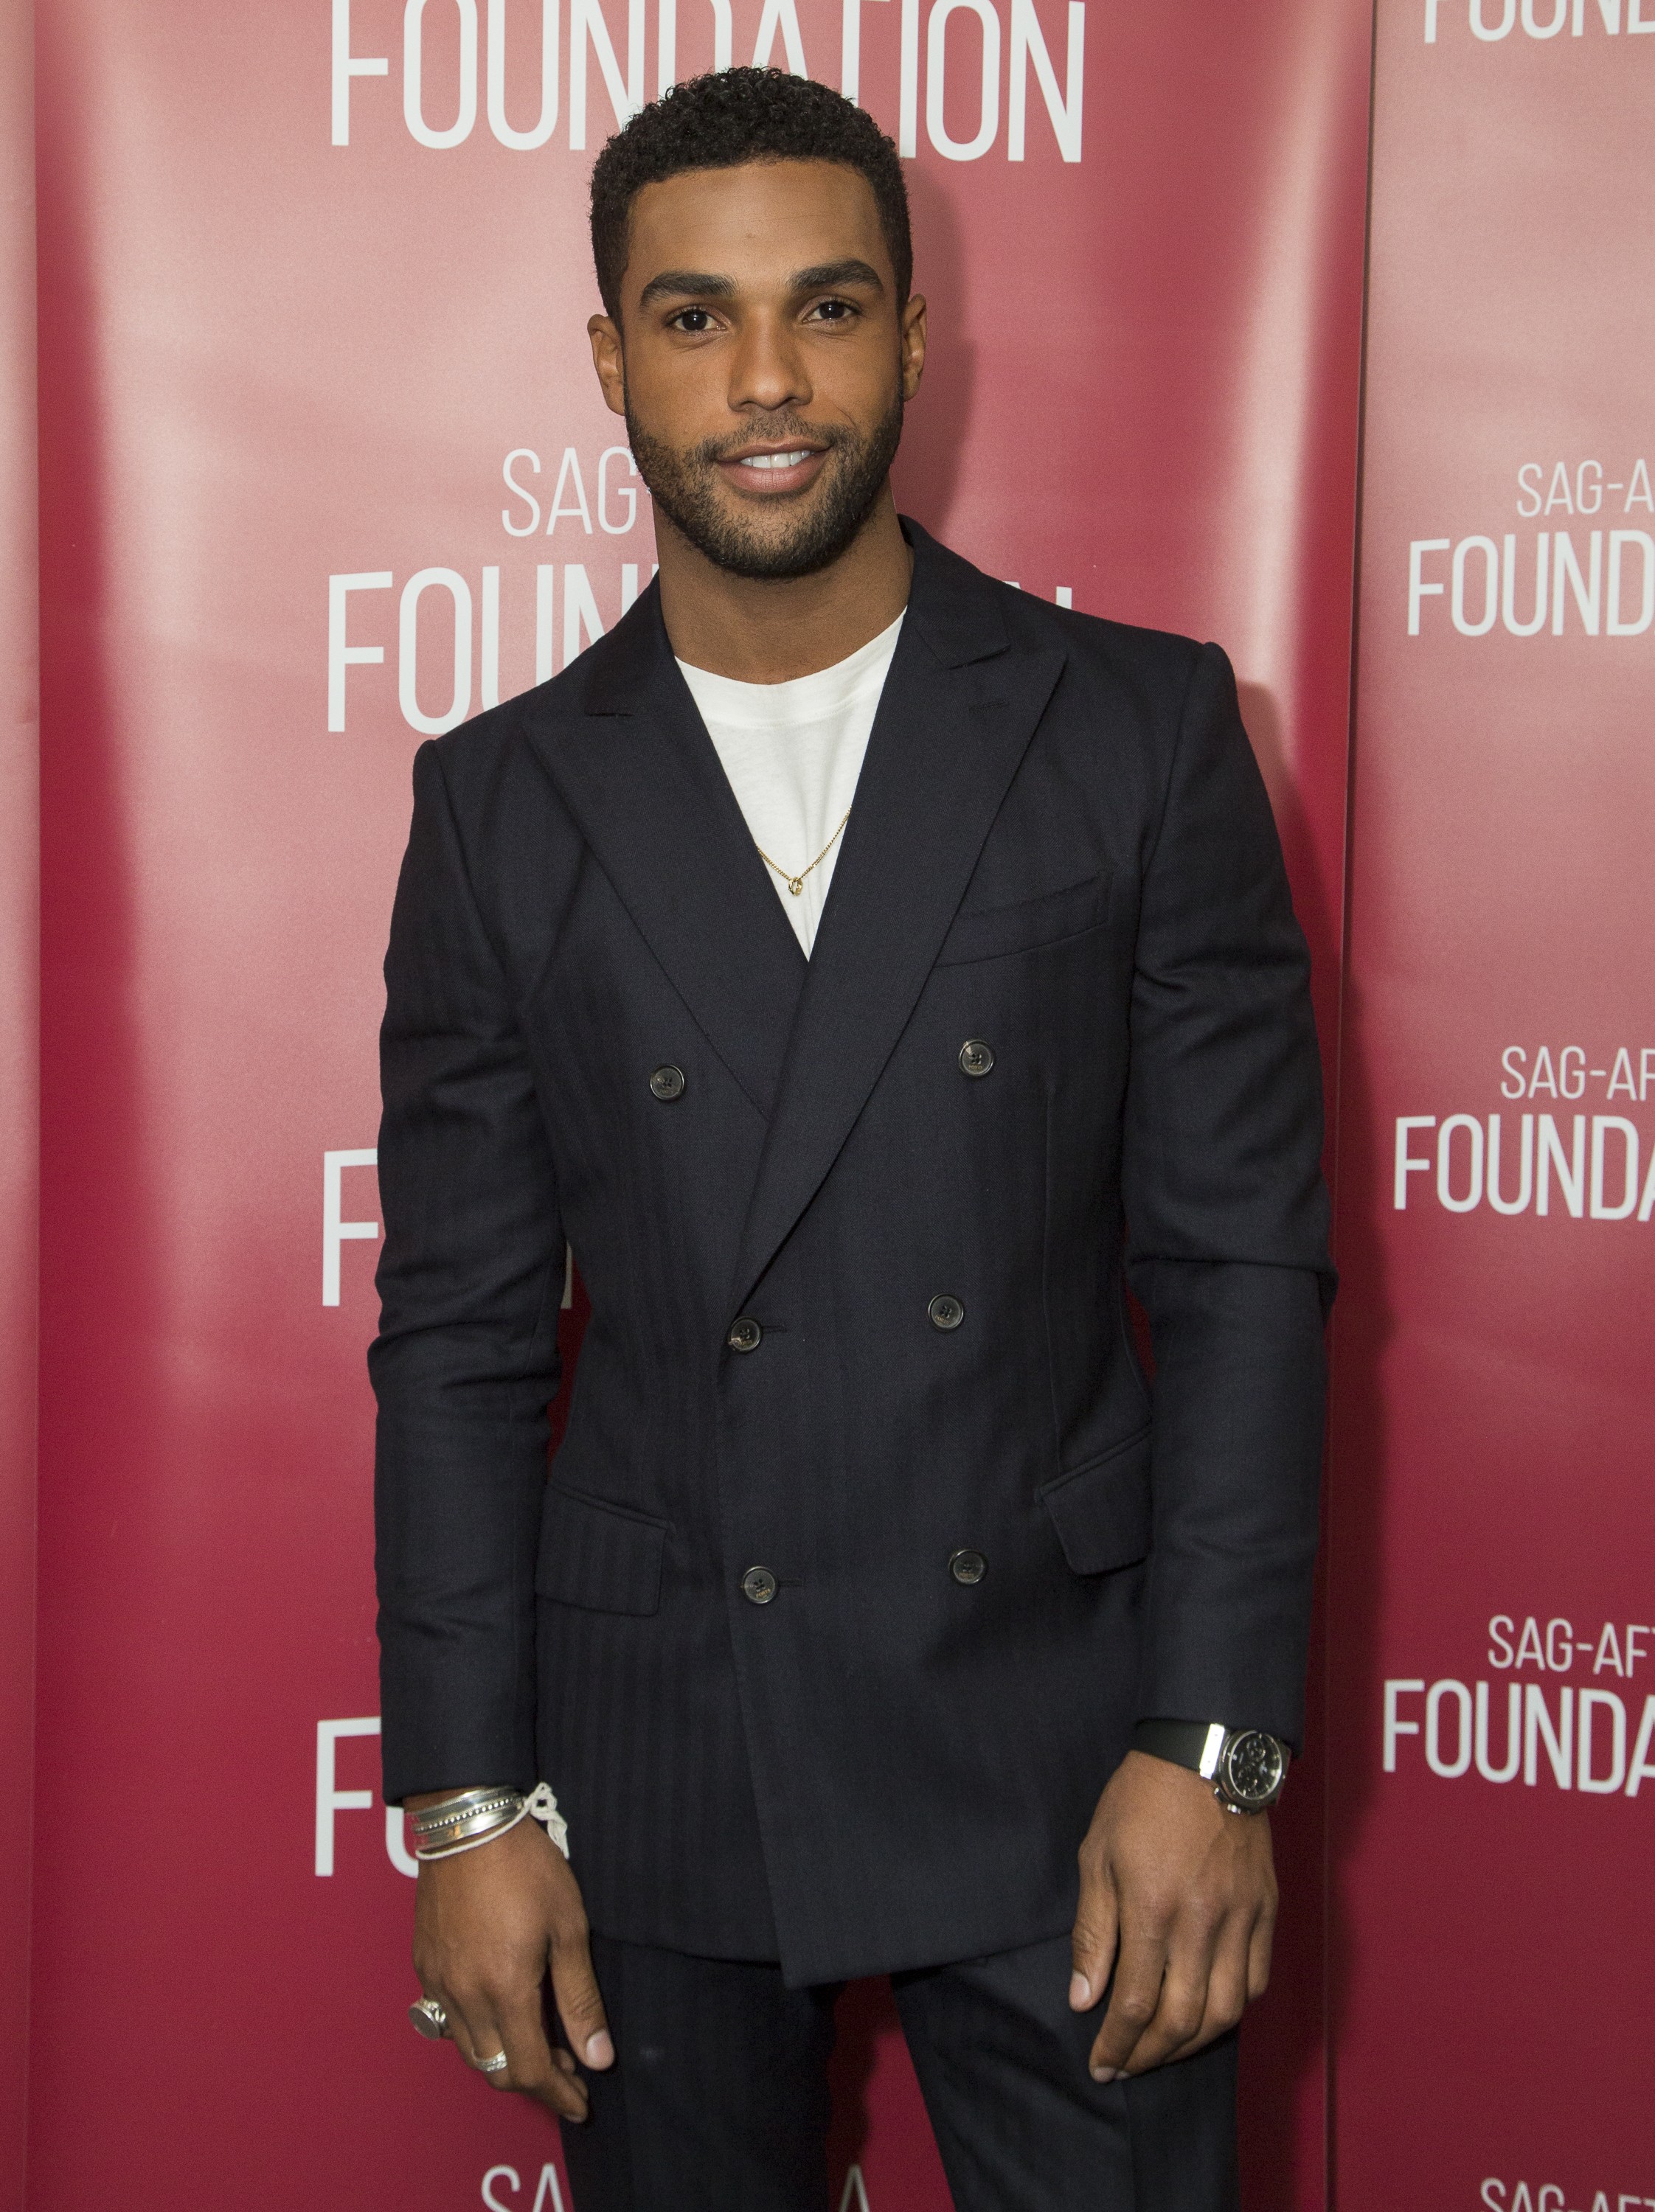 LOS ANGELES, CA - MARCH 07:  Actor Lucien Laviscount attends SAG-AFTRA Foundation's Conversations with "Snatch" at SAG-AFTRA Foundation Screening Room on March 7, 2017 in Los Angeles, California.  (Photo by Vincent Sandoval/Getty Images) (Foto: Getty Images)